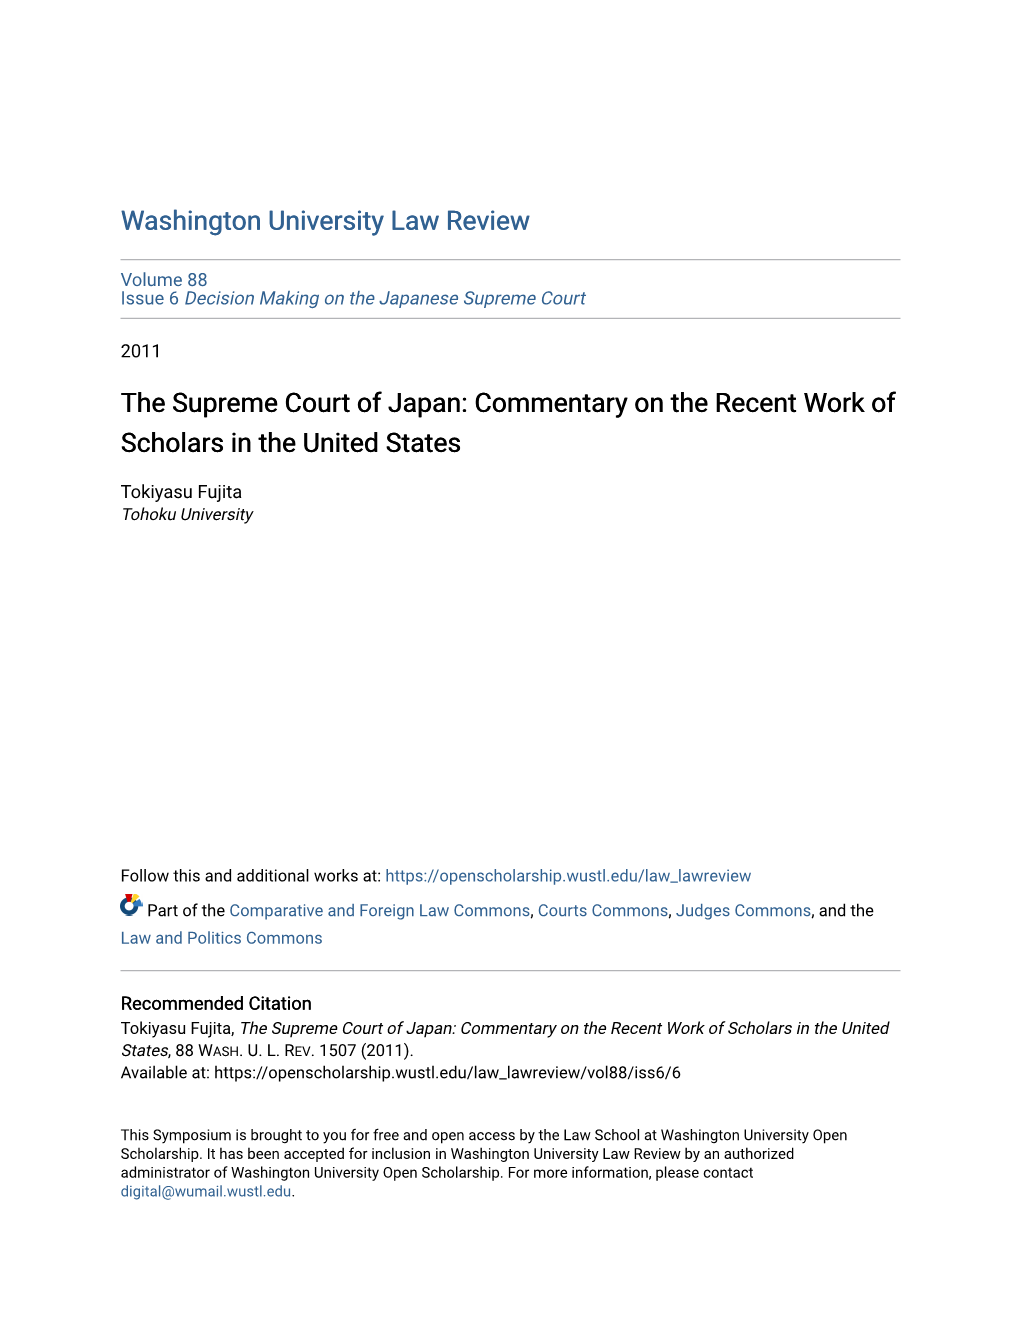 The Supreme Court of Japan: Commentary on the Recent Work of Scholars in the United States